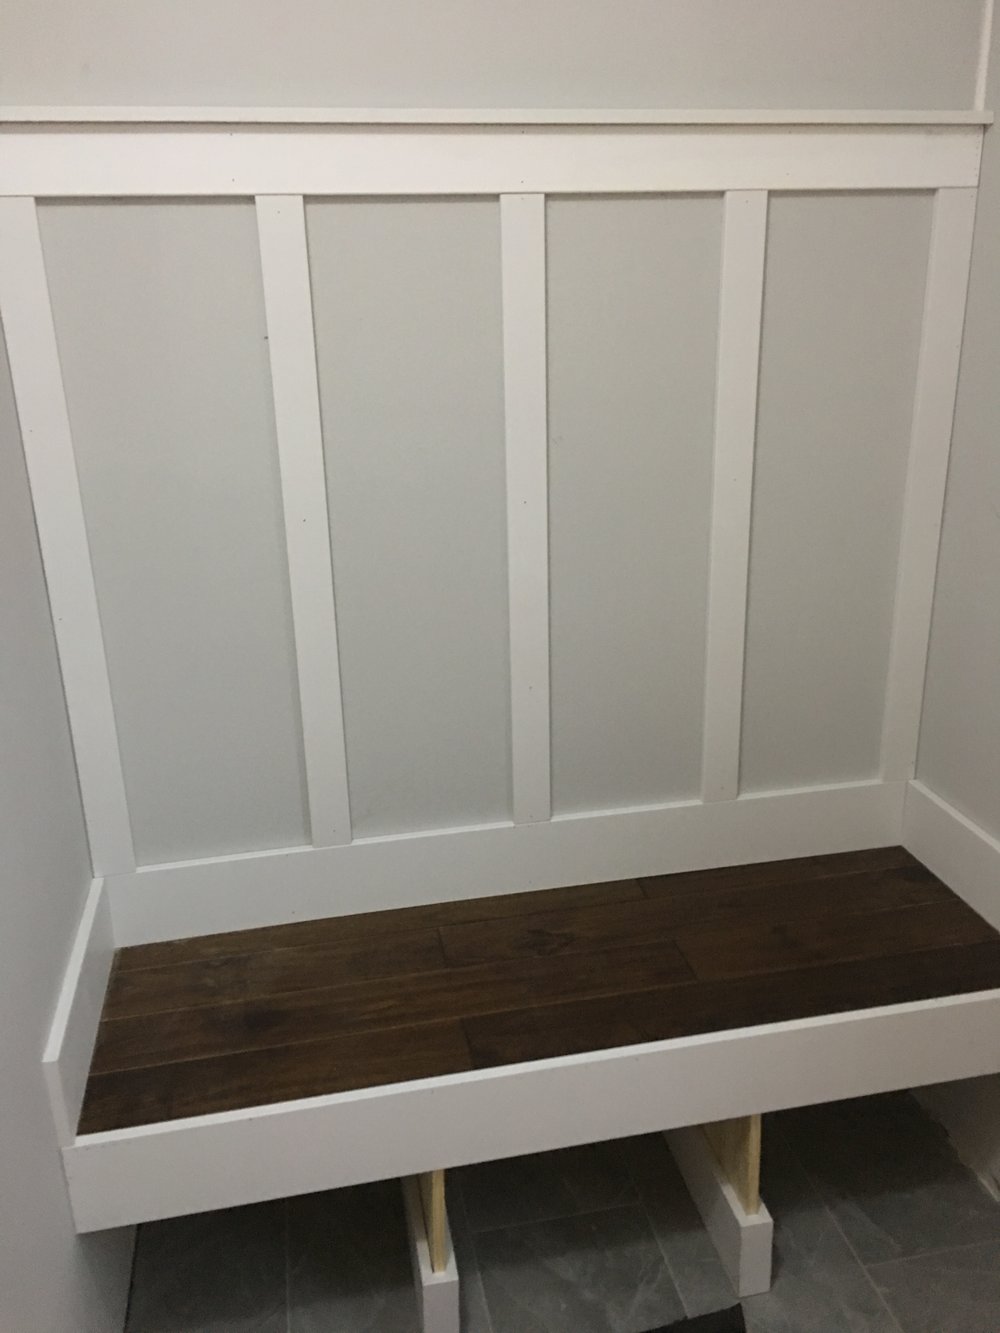 How To Build A Mudroom Bench Trubuild Construction